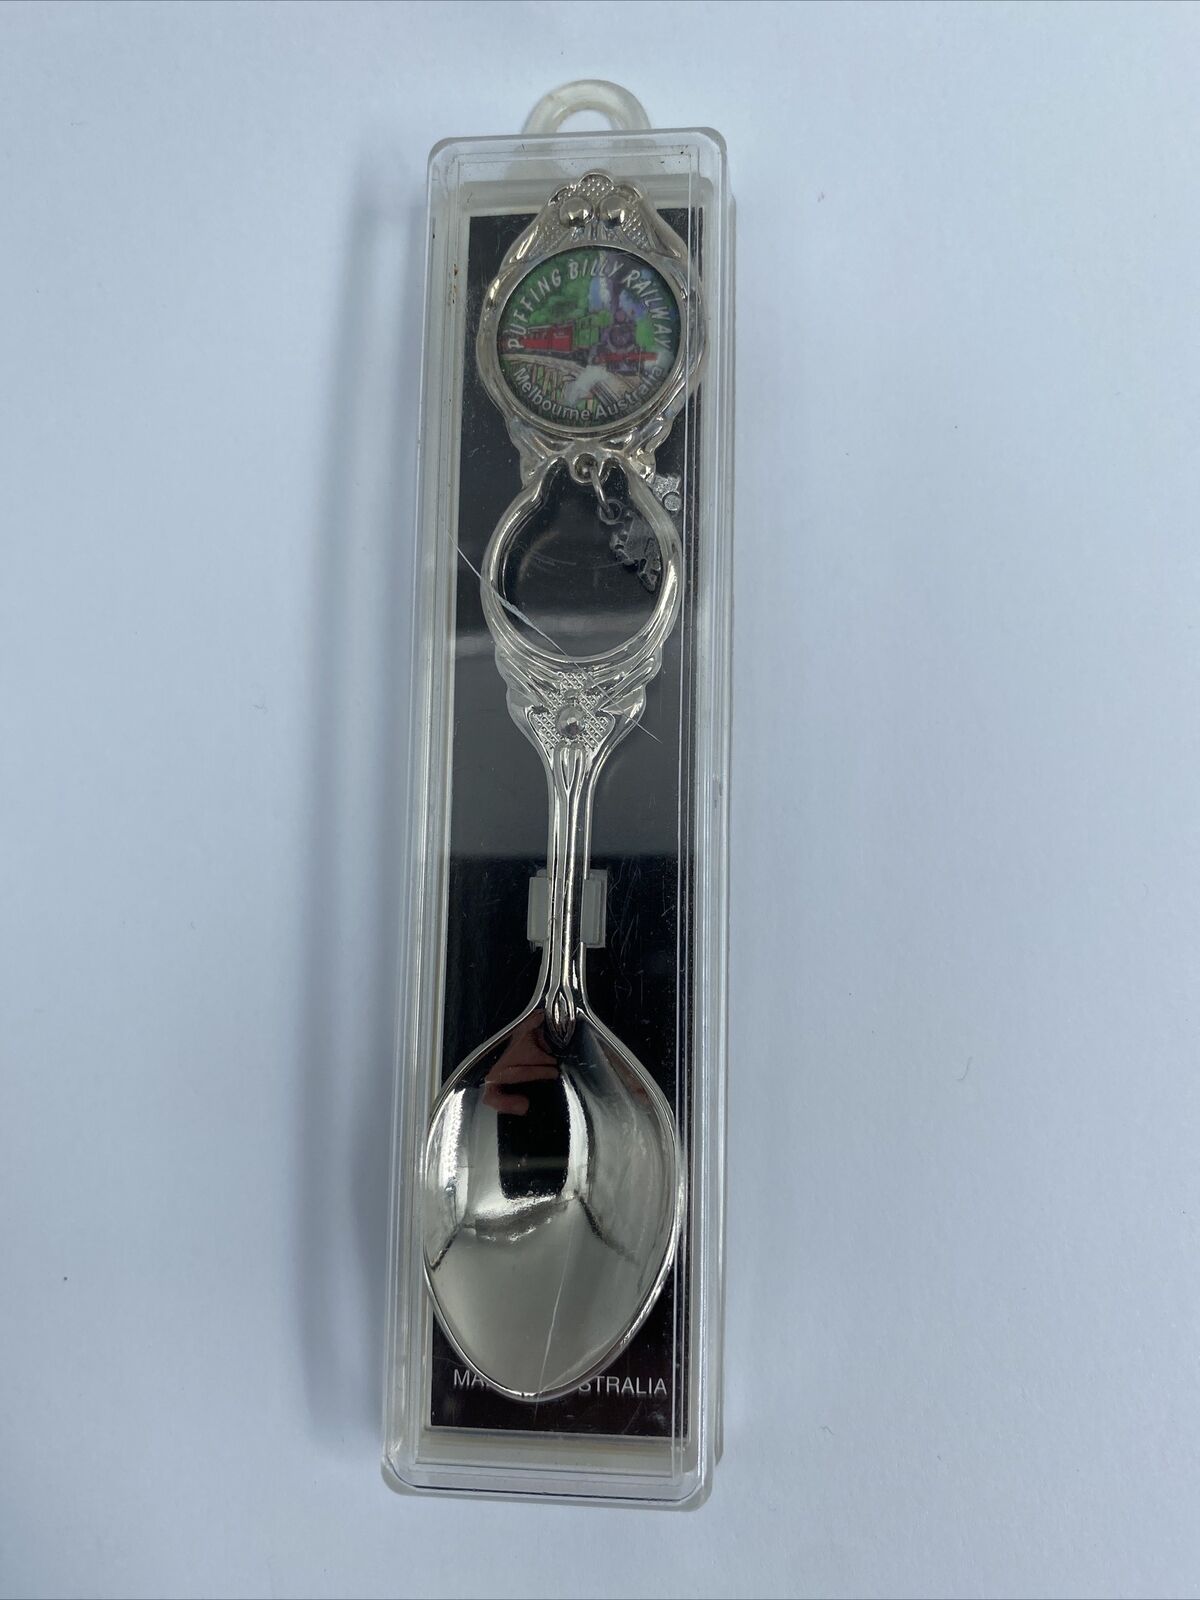 Souvenir Spoon - Puffing Billy Railway Melbourne Australia- Silver Plated